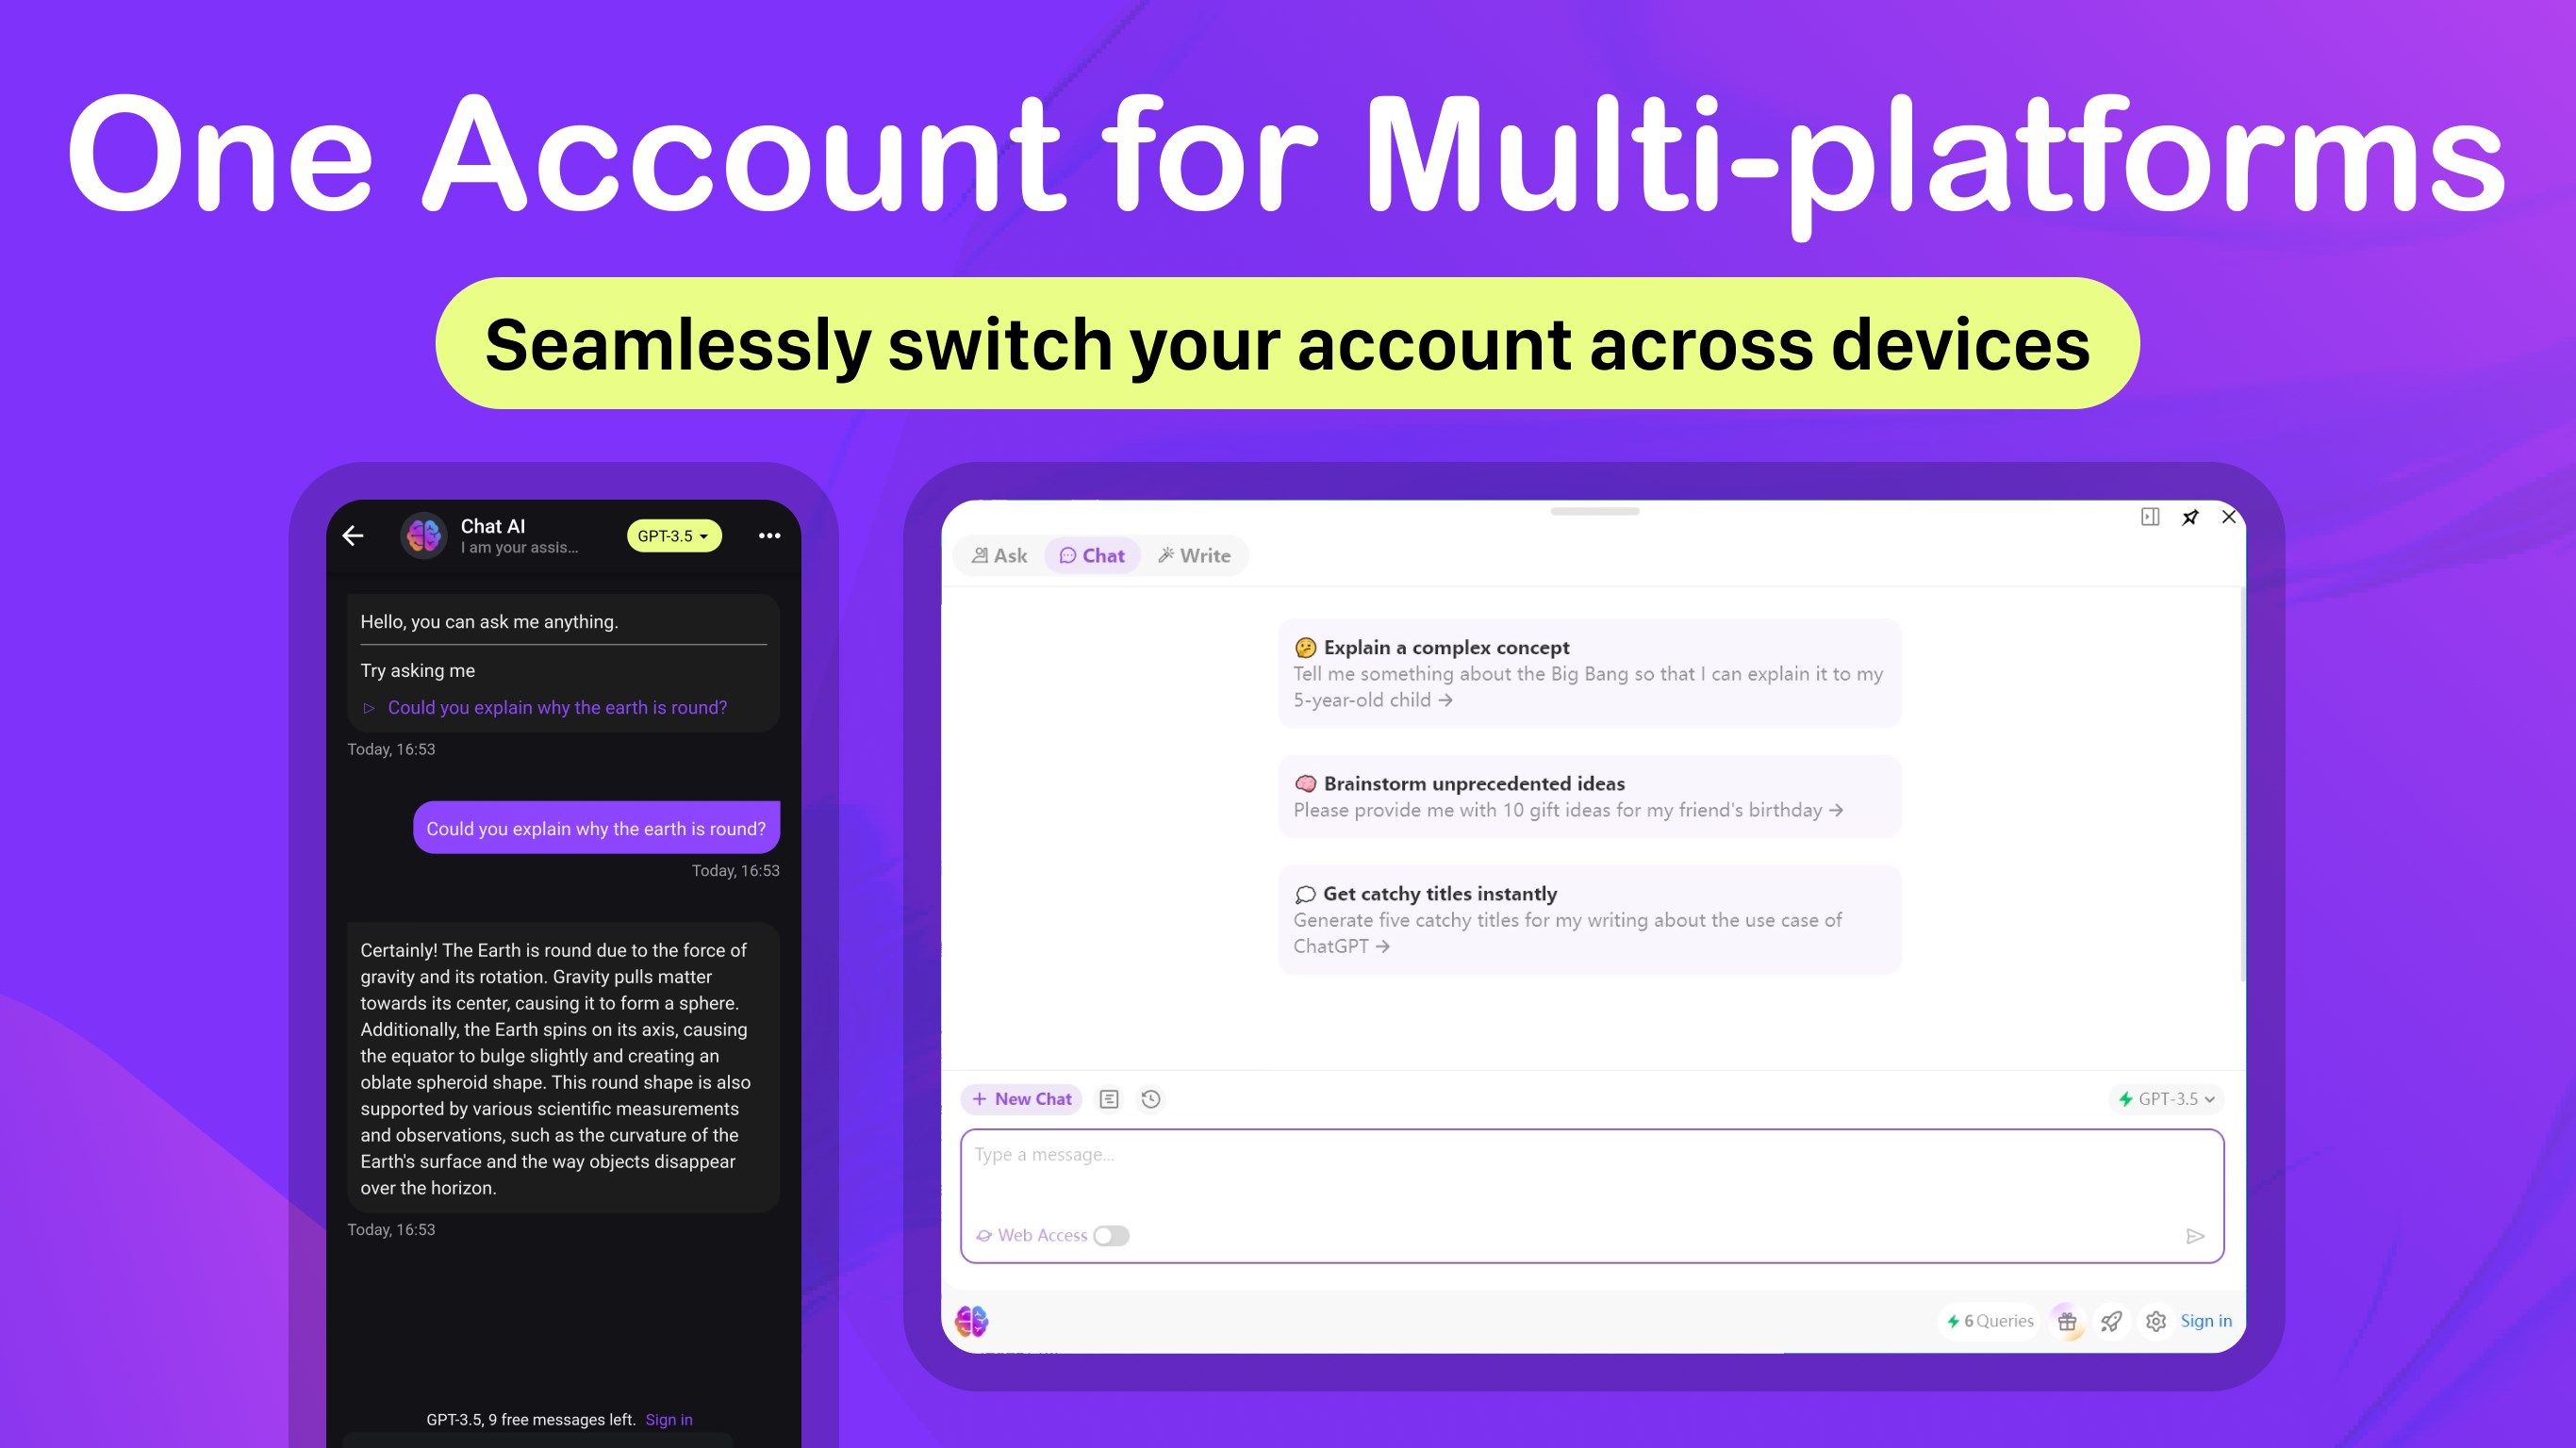 One account for multi-platforms